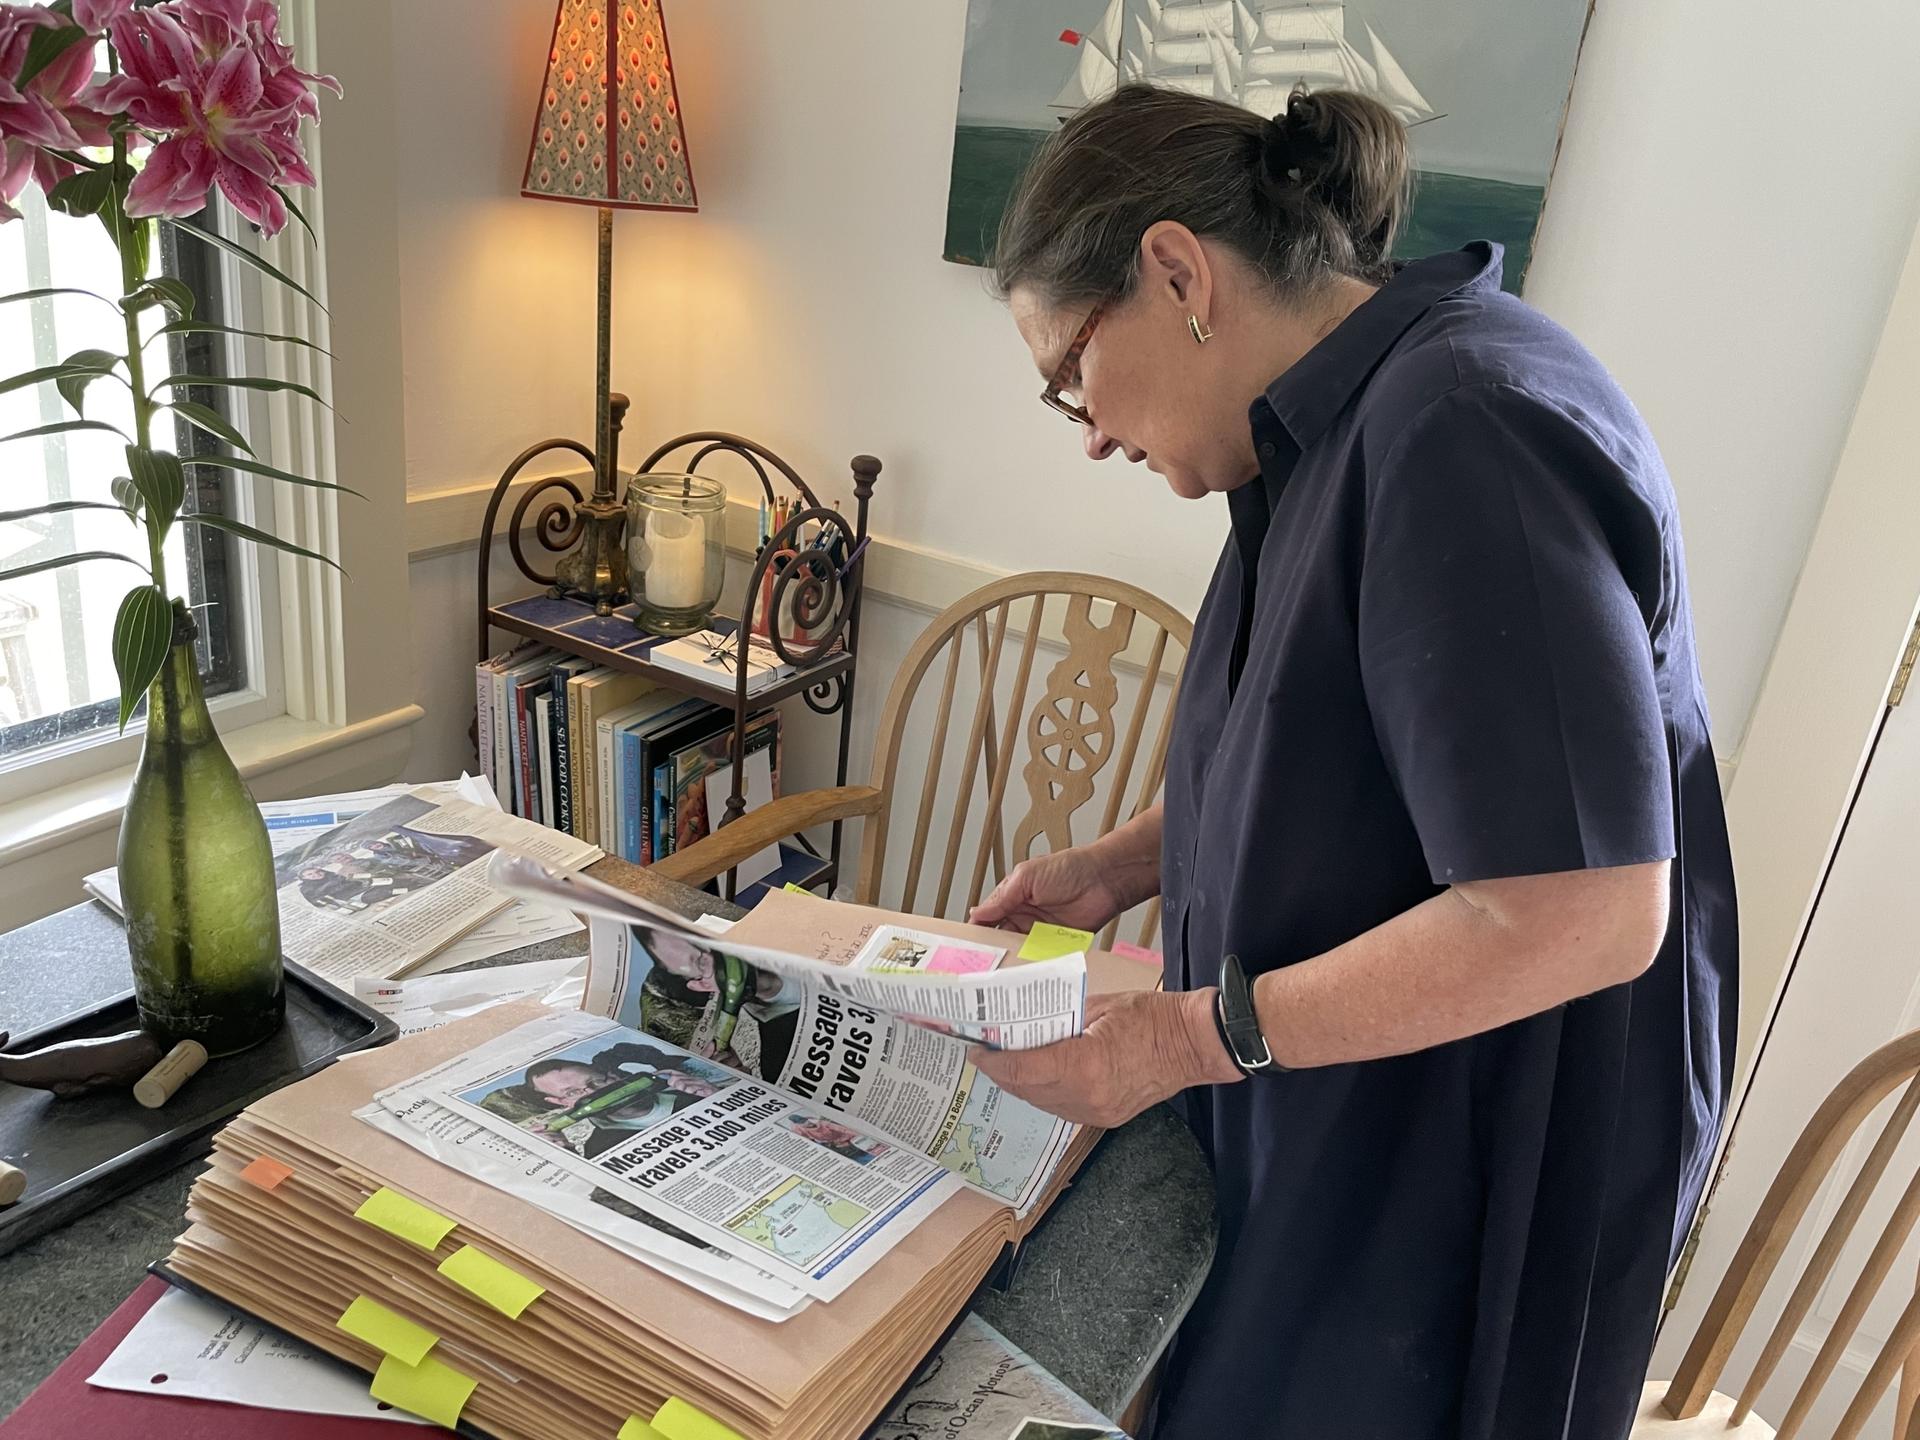 Sharon Ames looks through scrapbooks of responses from people who found bottles with notes tossed into the ocean by her husband, Pennel Ames, in their home in Nantucket, Massachusetts, Jul. 30, 2023.